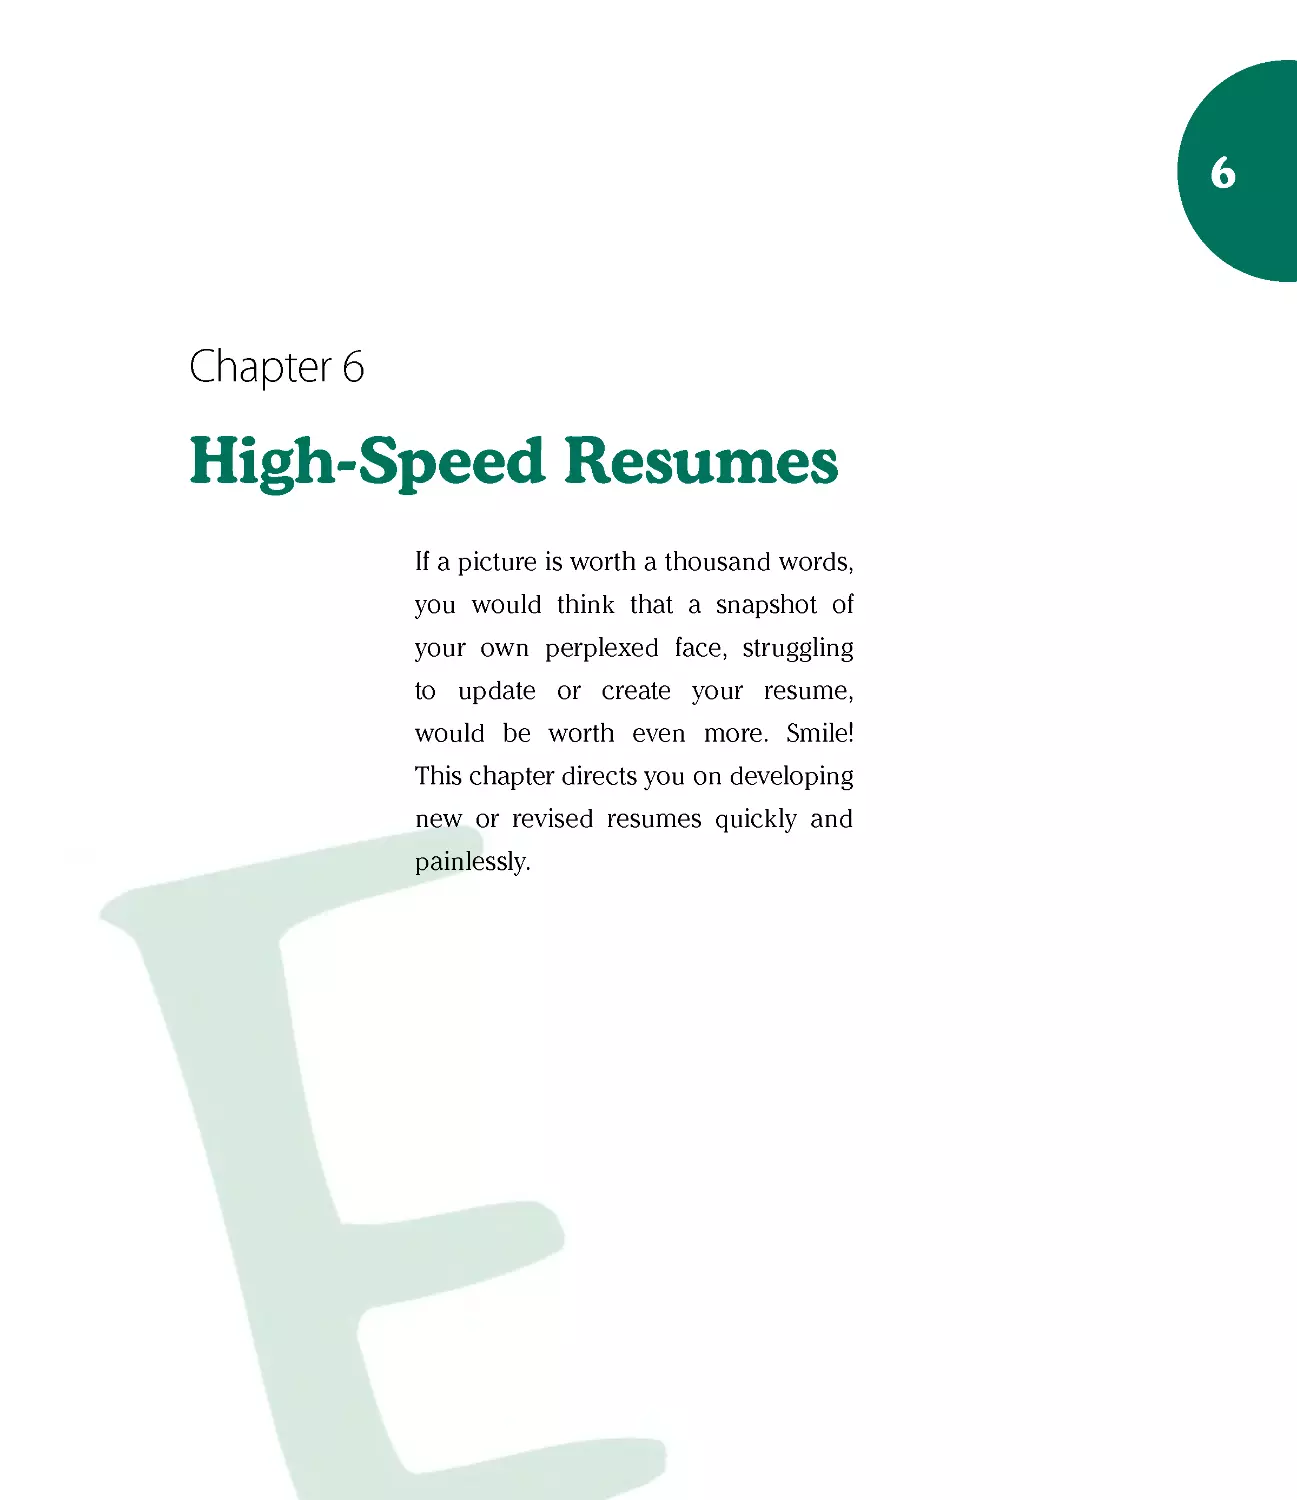 Chapter 6: High-Speed Resumes